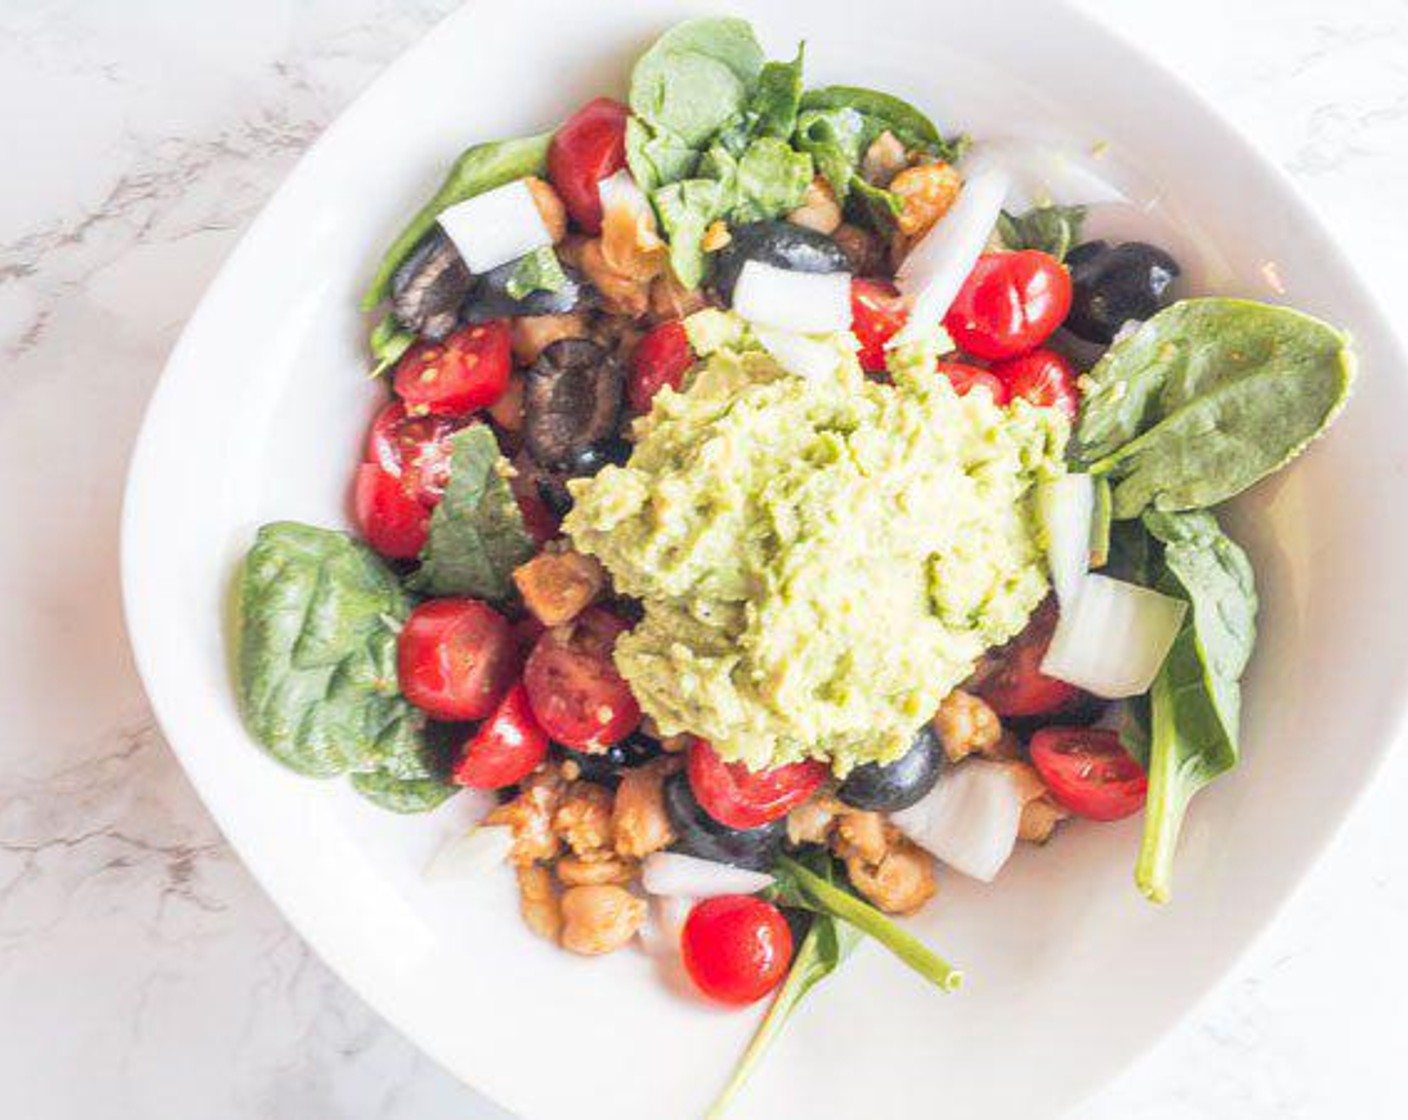 step 4 Top chickpea bowl with avocado and enjoy!